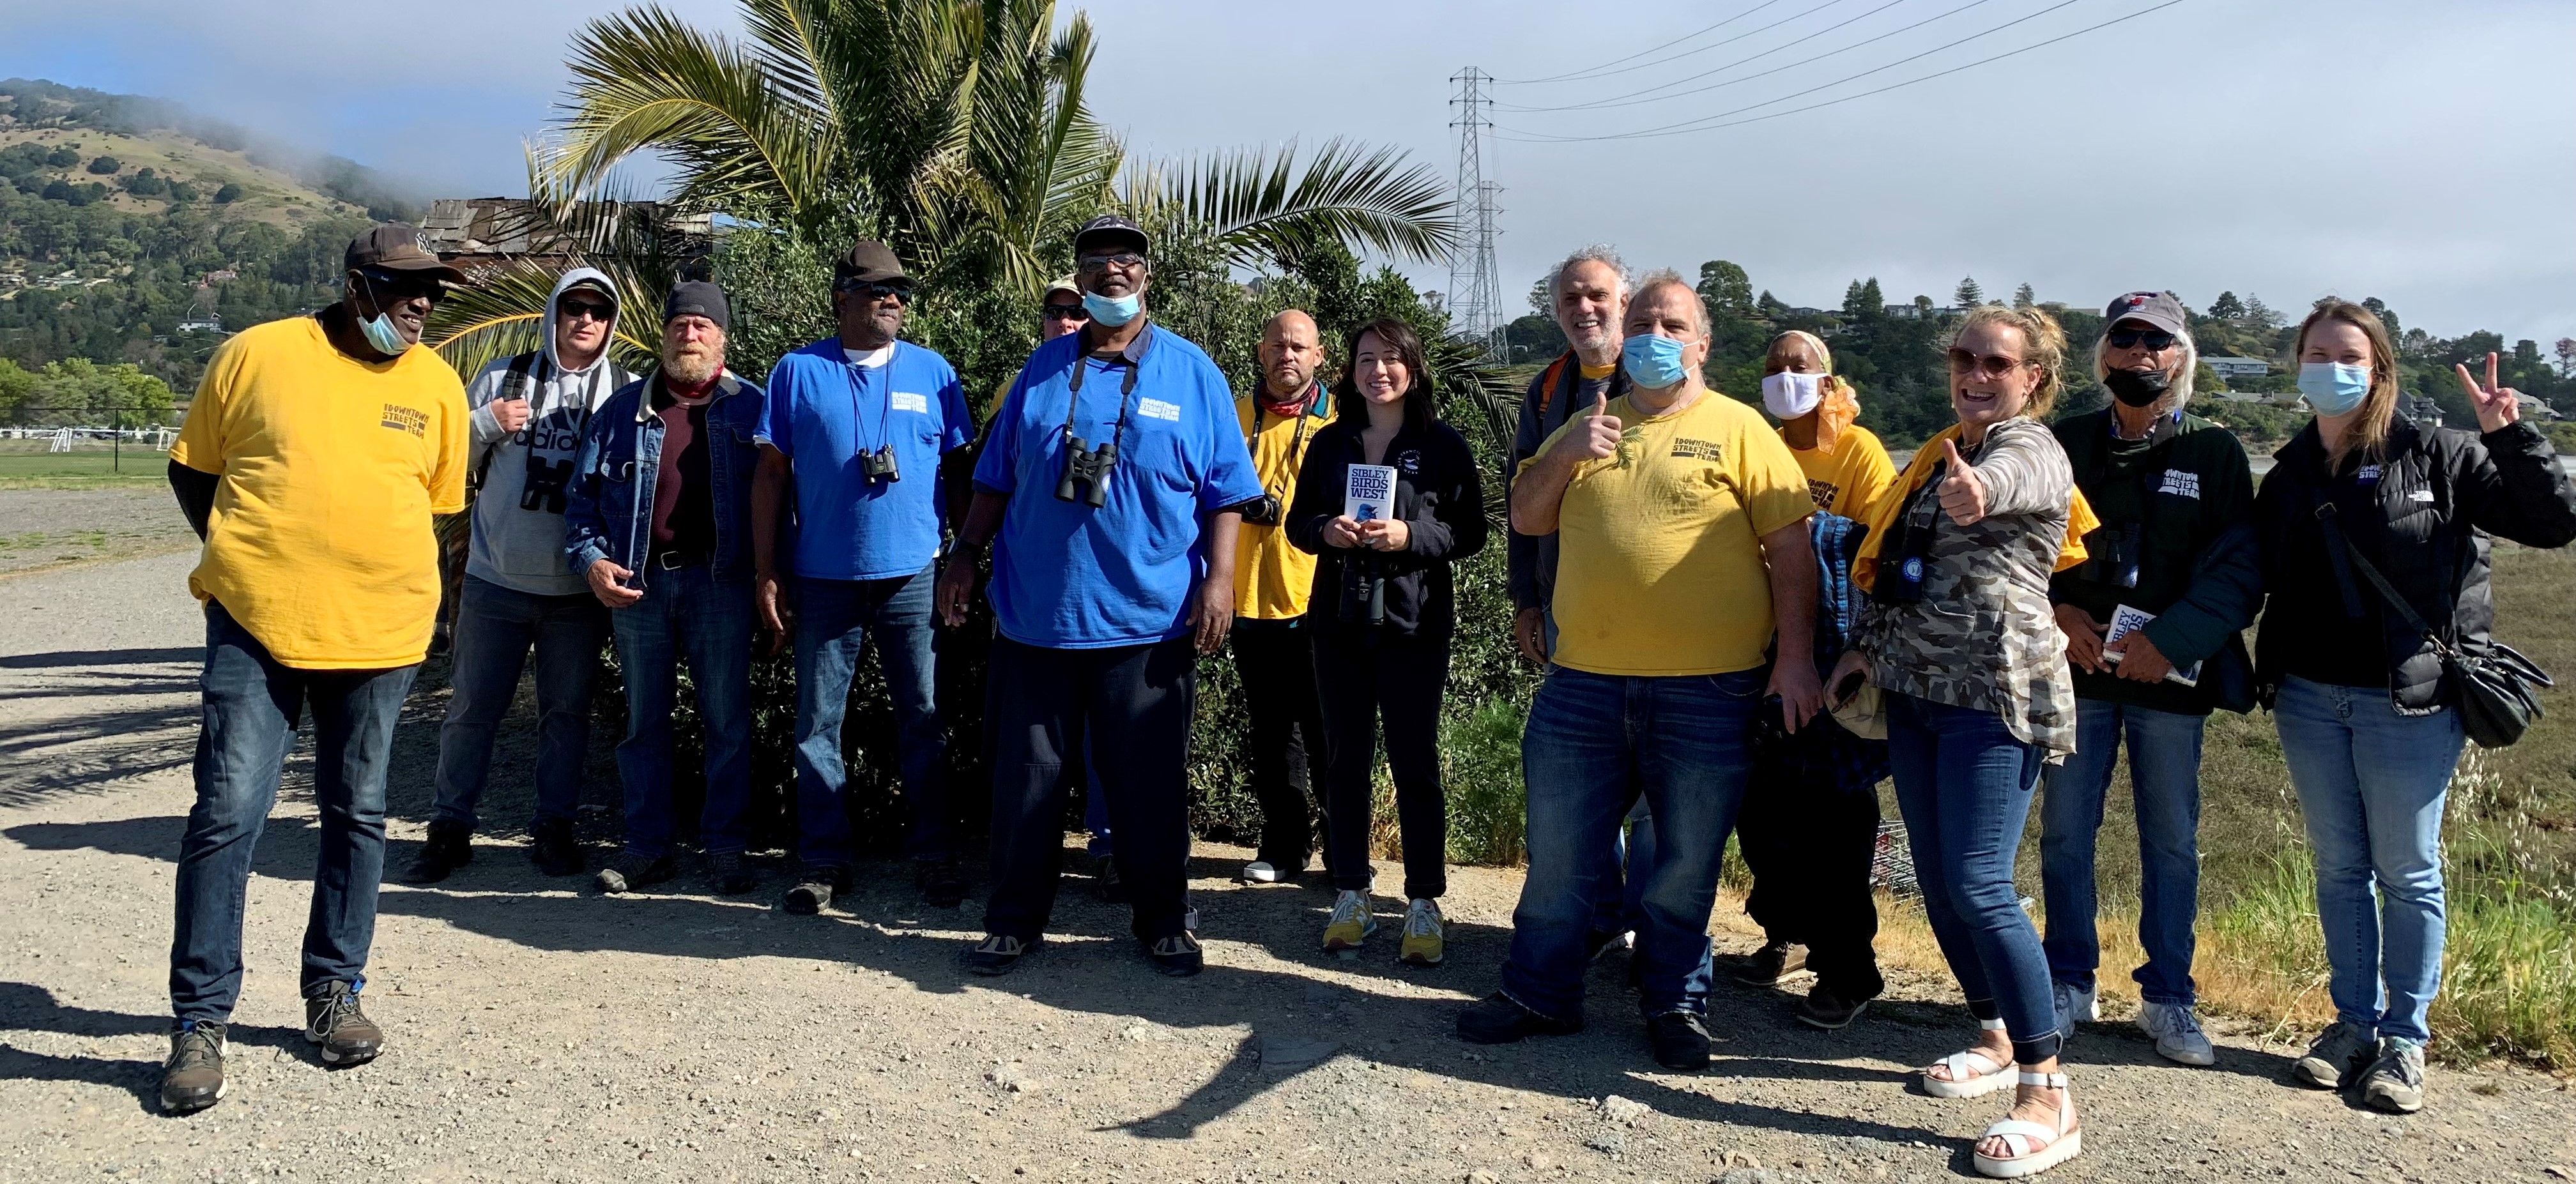 Group photo of Bella and Downtown Streets Team Members wearing bright blue and yellow tshirts smiling and standing in front of the marsh at Pickleweed Park.